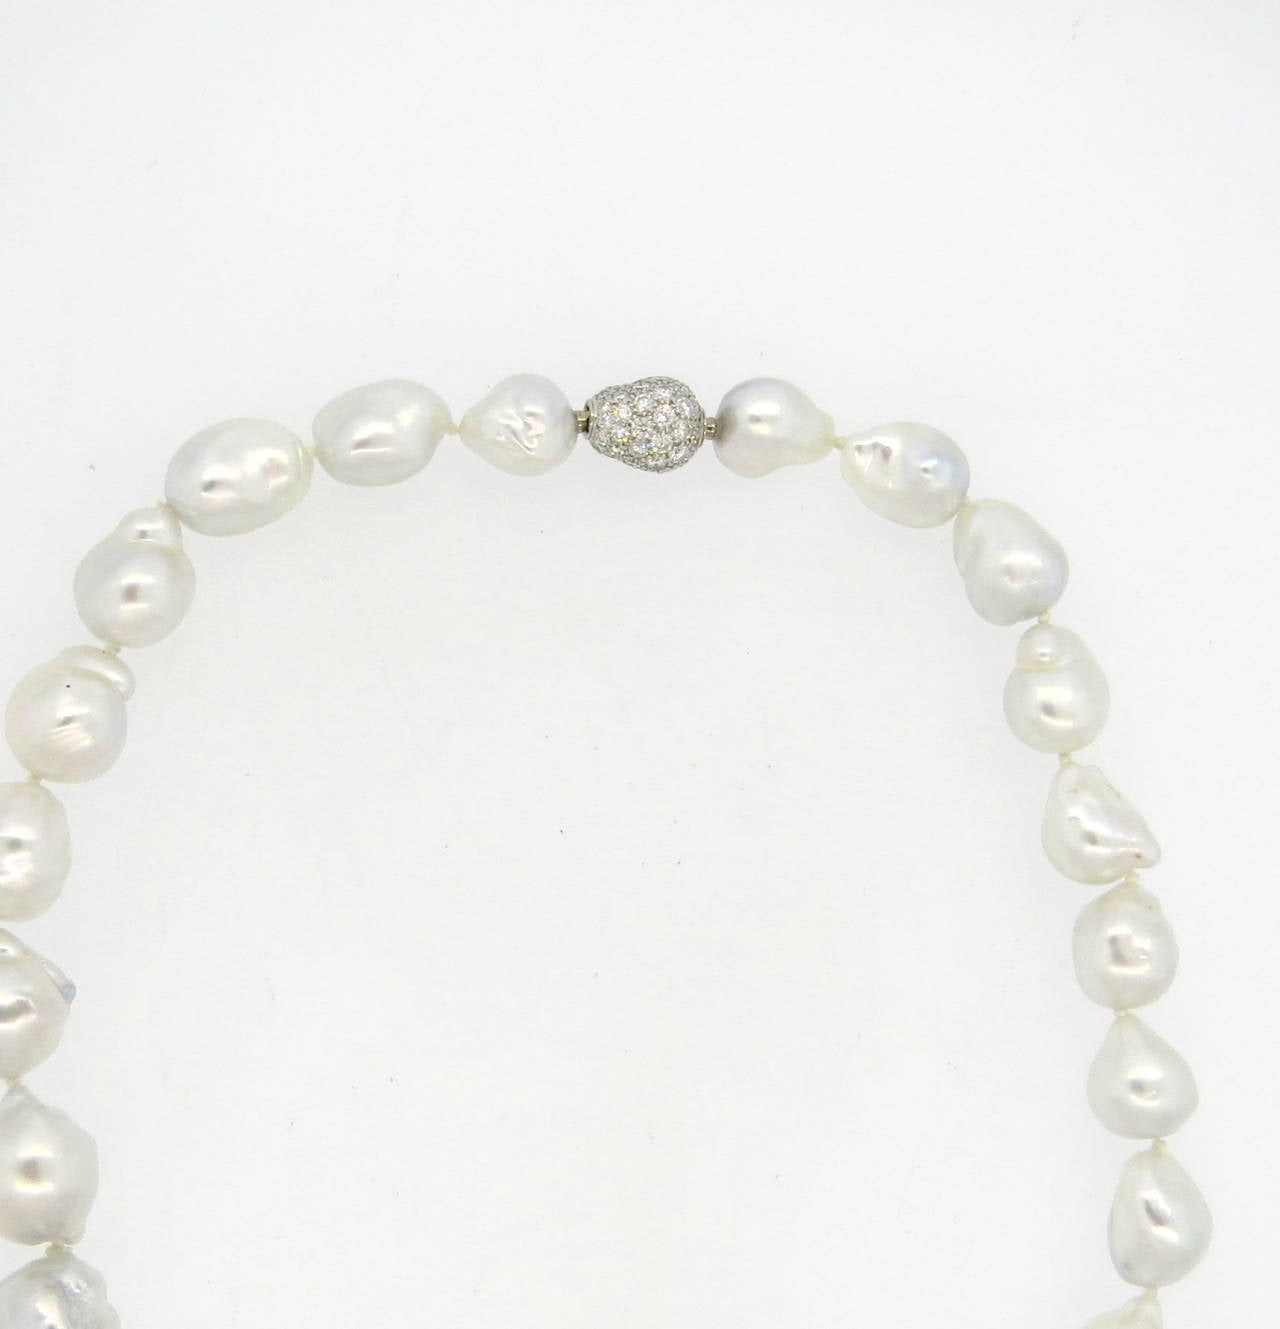 A necklace featuring graduated south sea baroque pearls ranging in size from 13.8mm x 12mm to 18mm x 18.6mm and an 18k white gold clasp set with approx. 1.30ctw of G/VS diamonds.  The necklace weighs 72.1 grams and measures 17